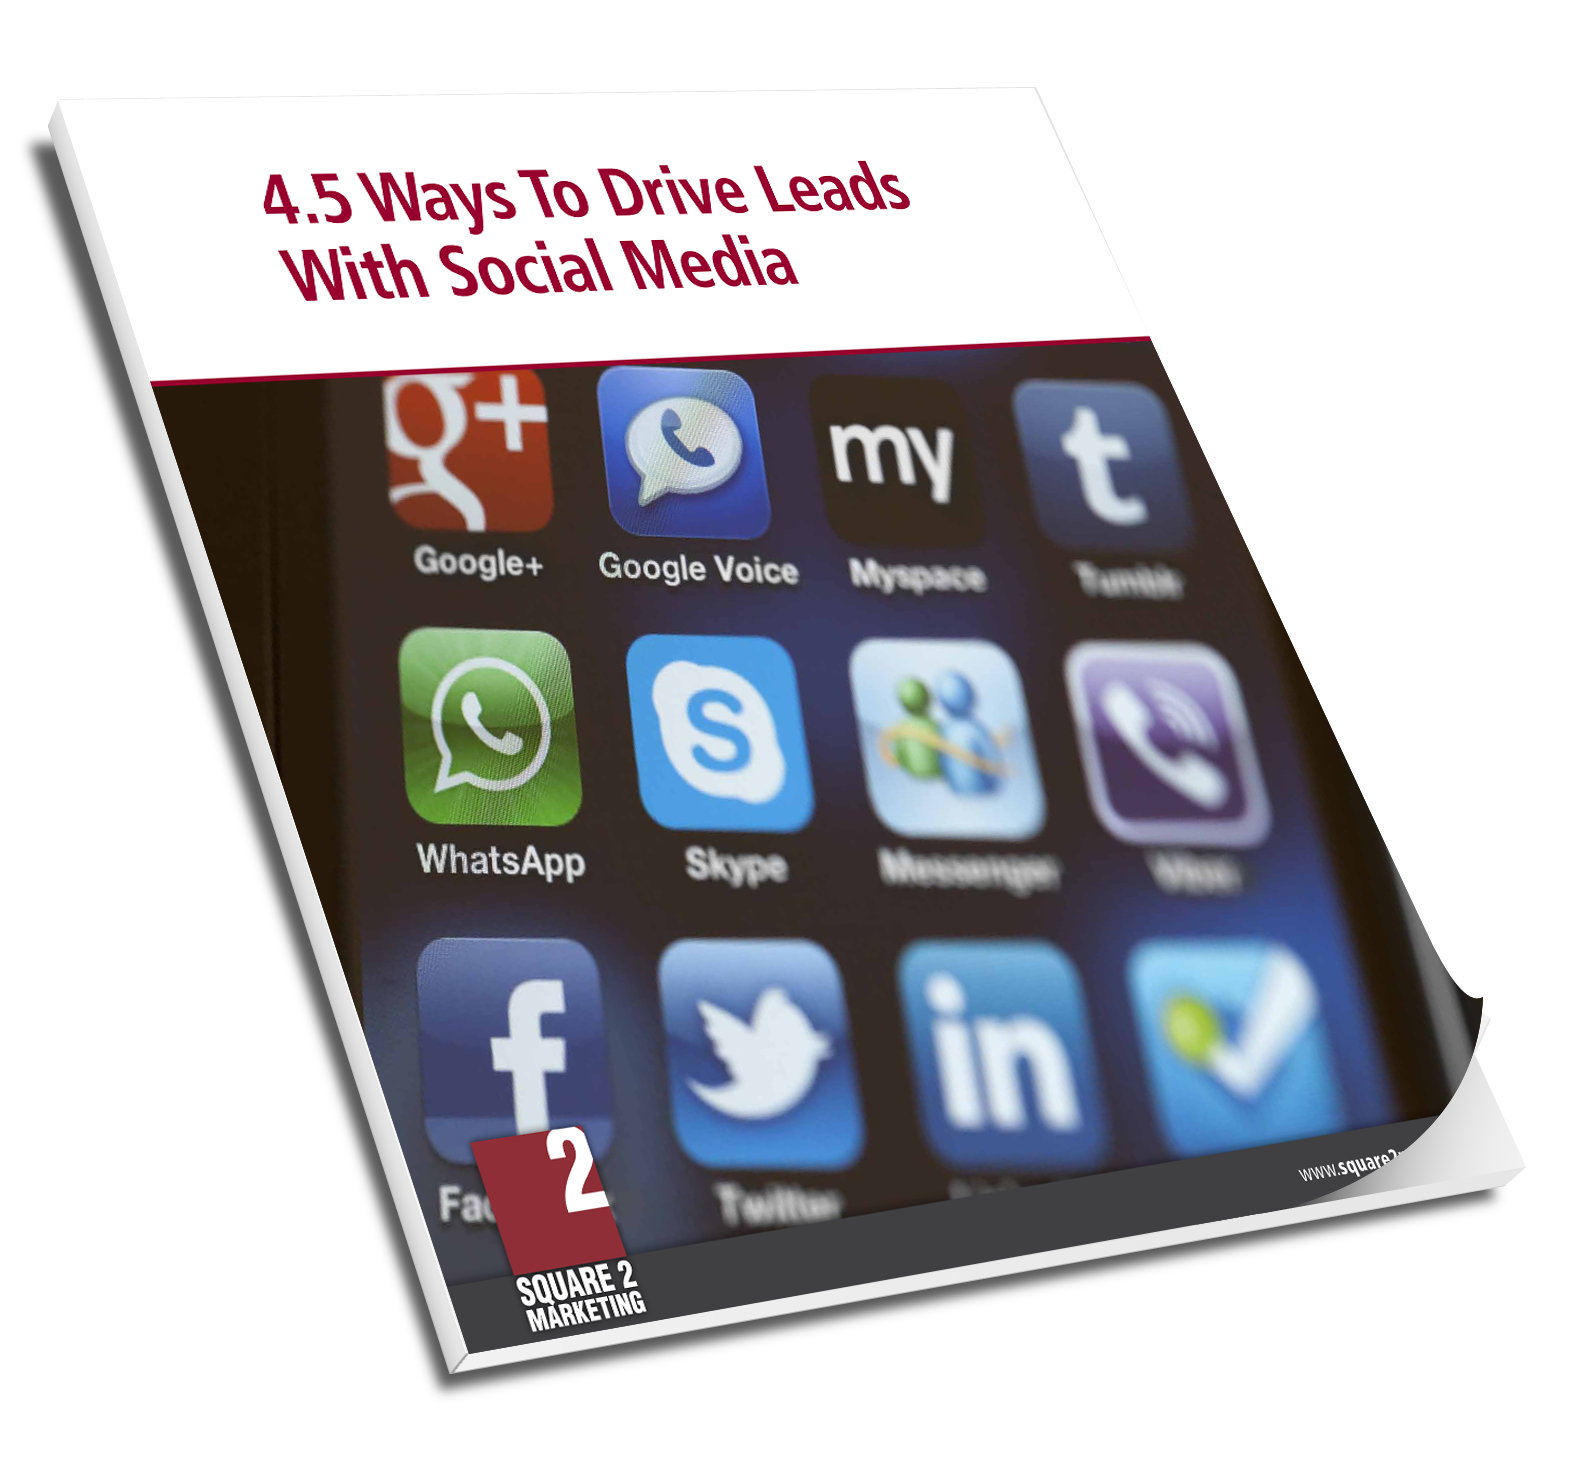 nro 4.5 ways drive leads with social media cover